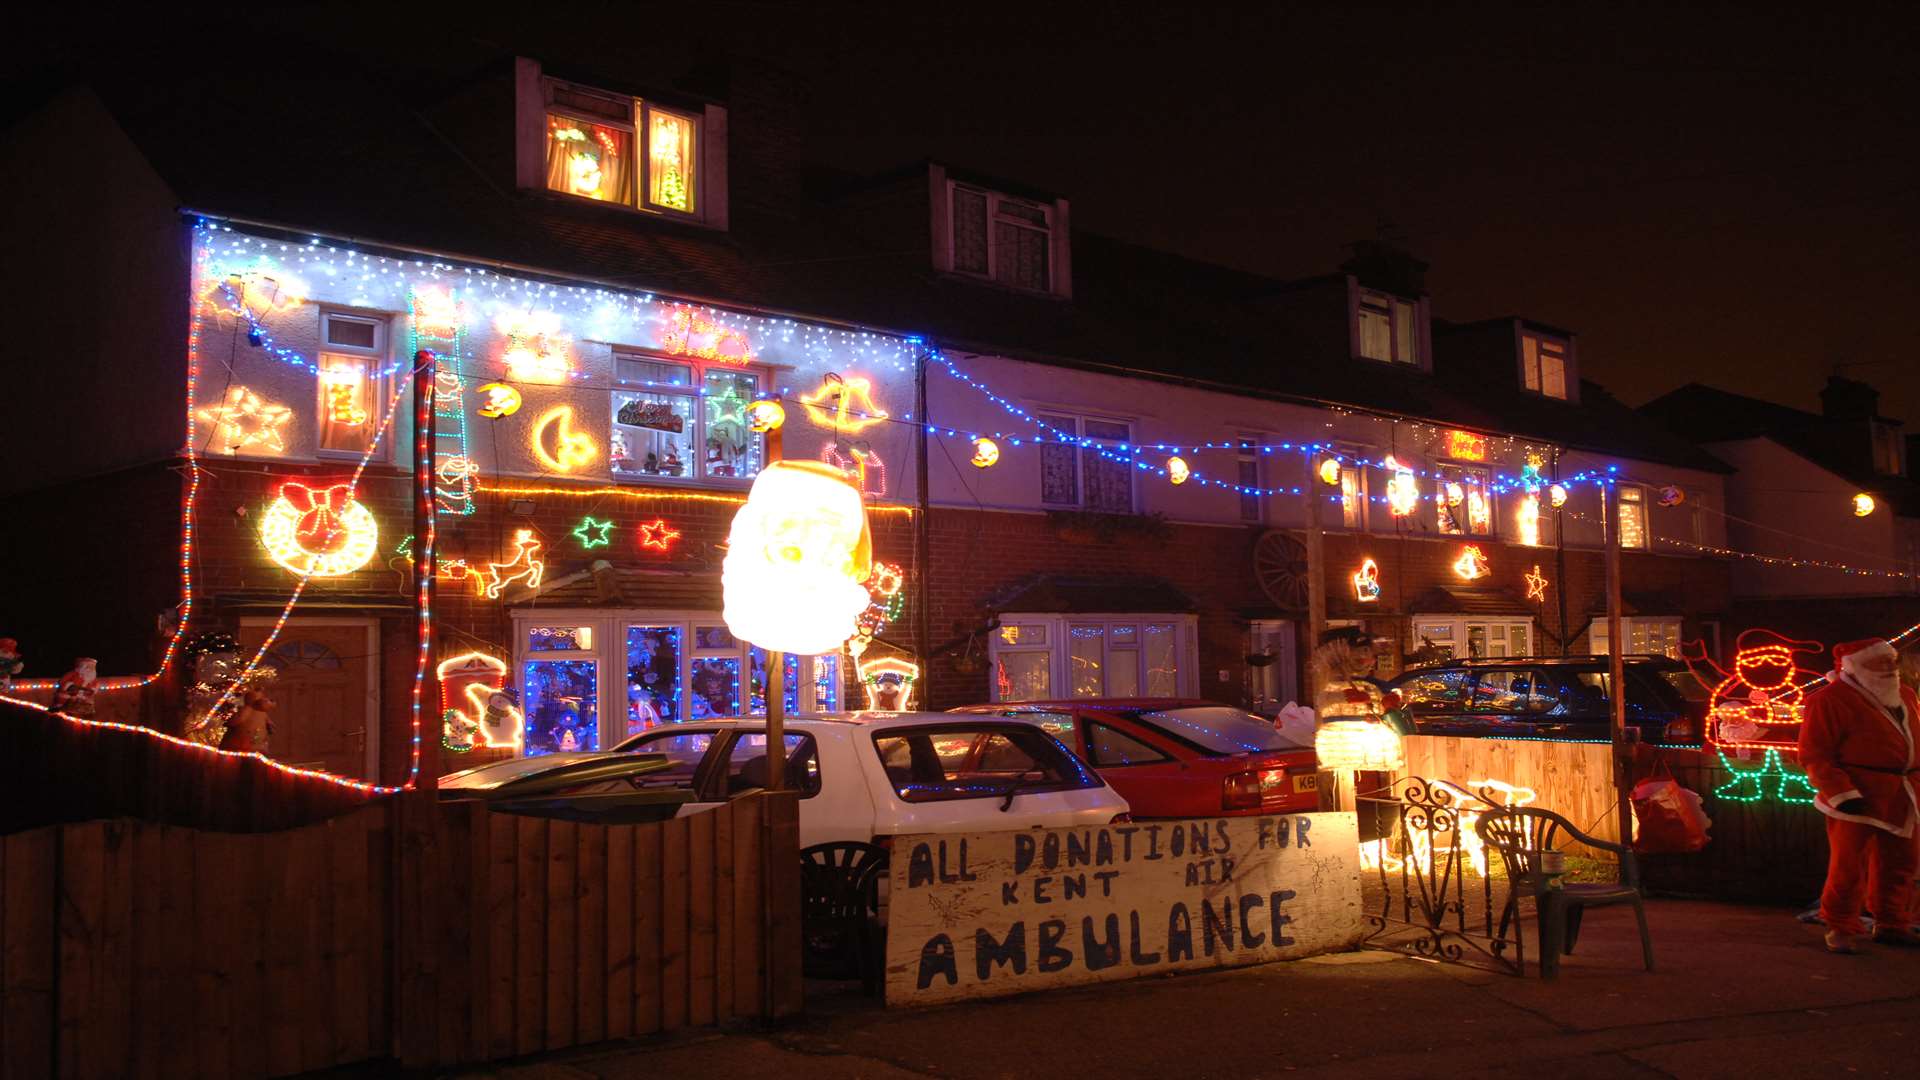 Obie was well-known for his Christmas displays which raised money for charity